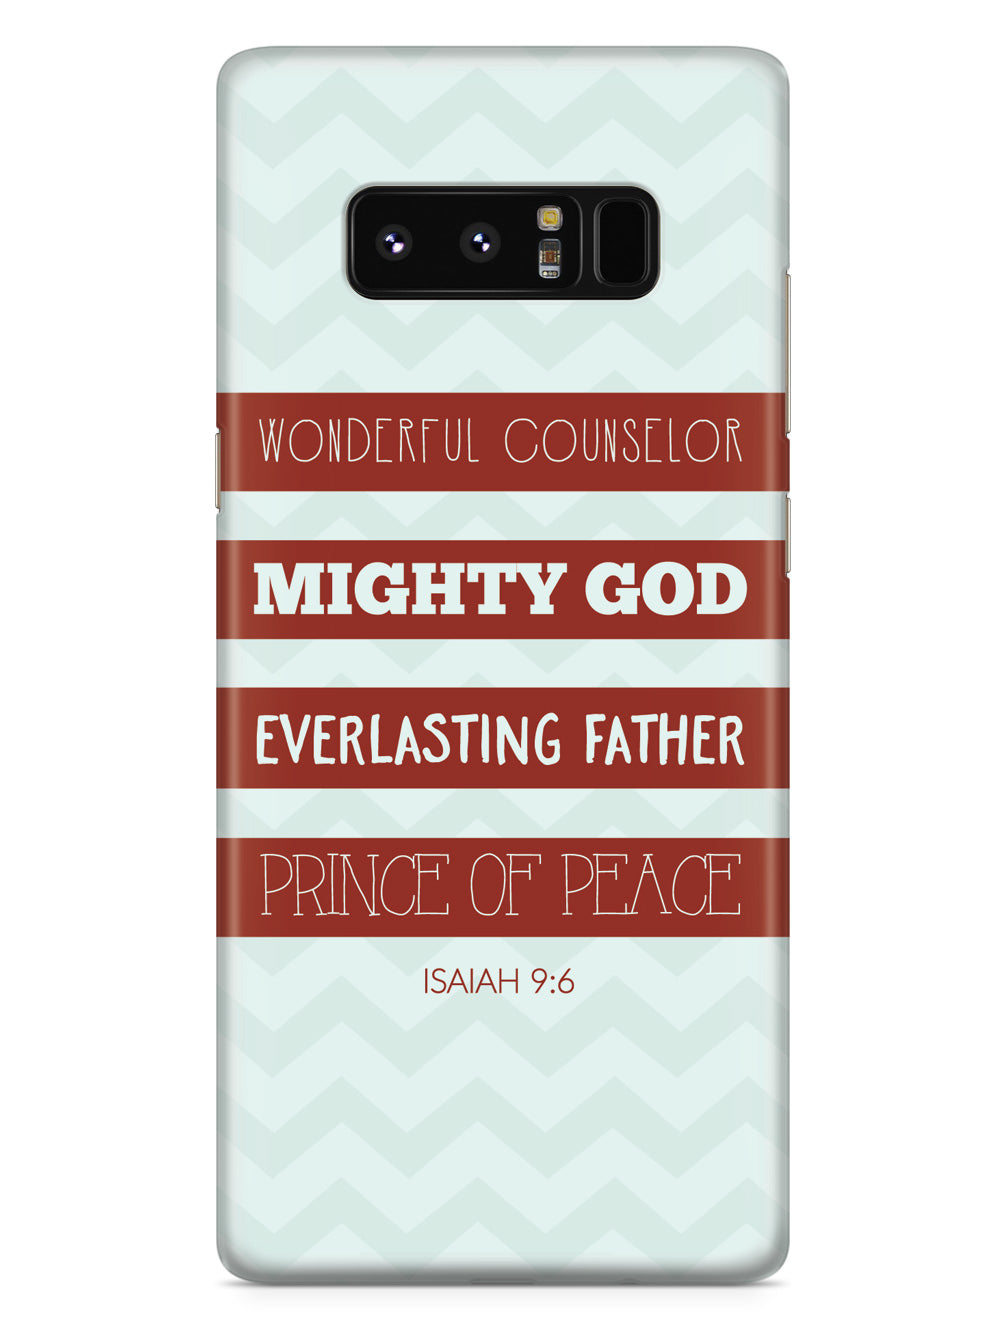 Isaiah 9:6 Bible Verse Quote Case